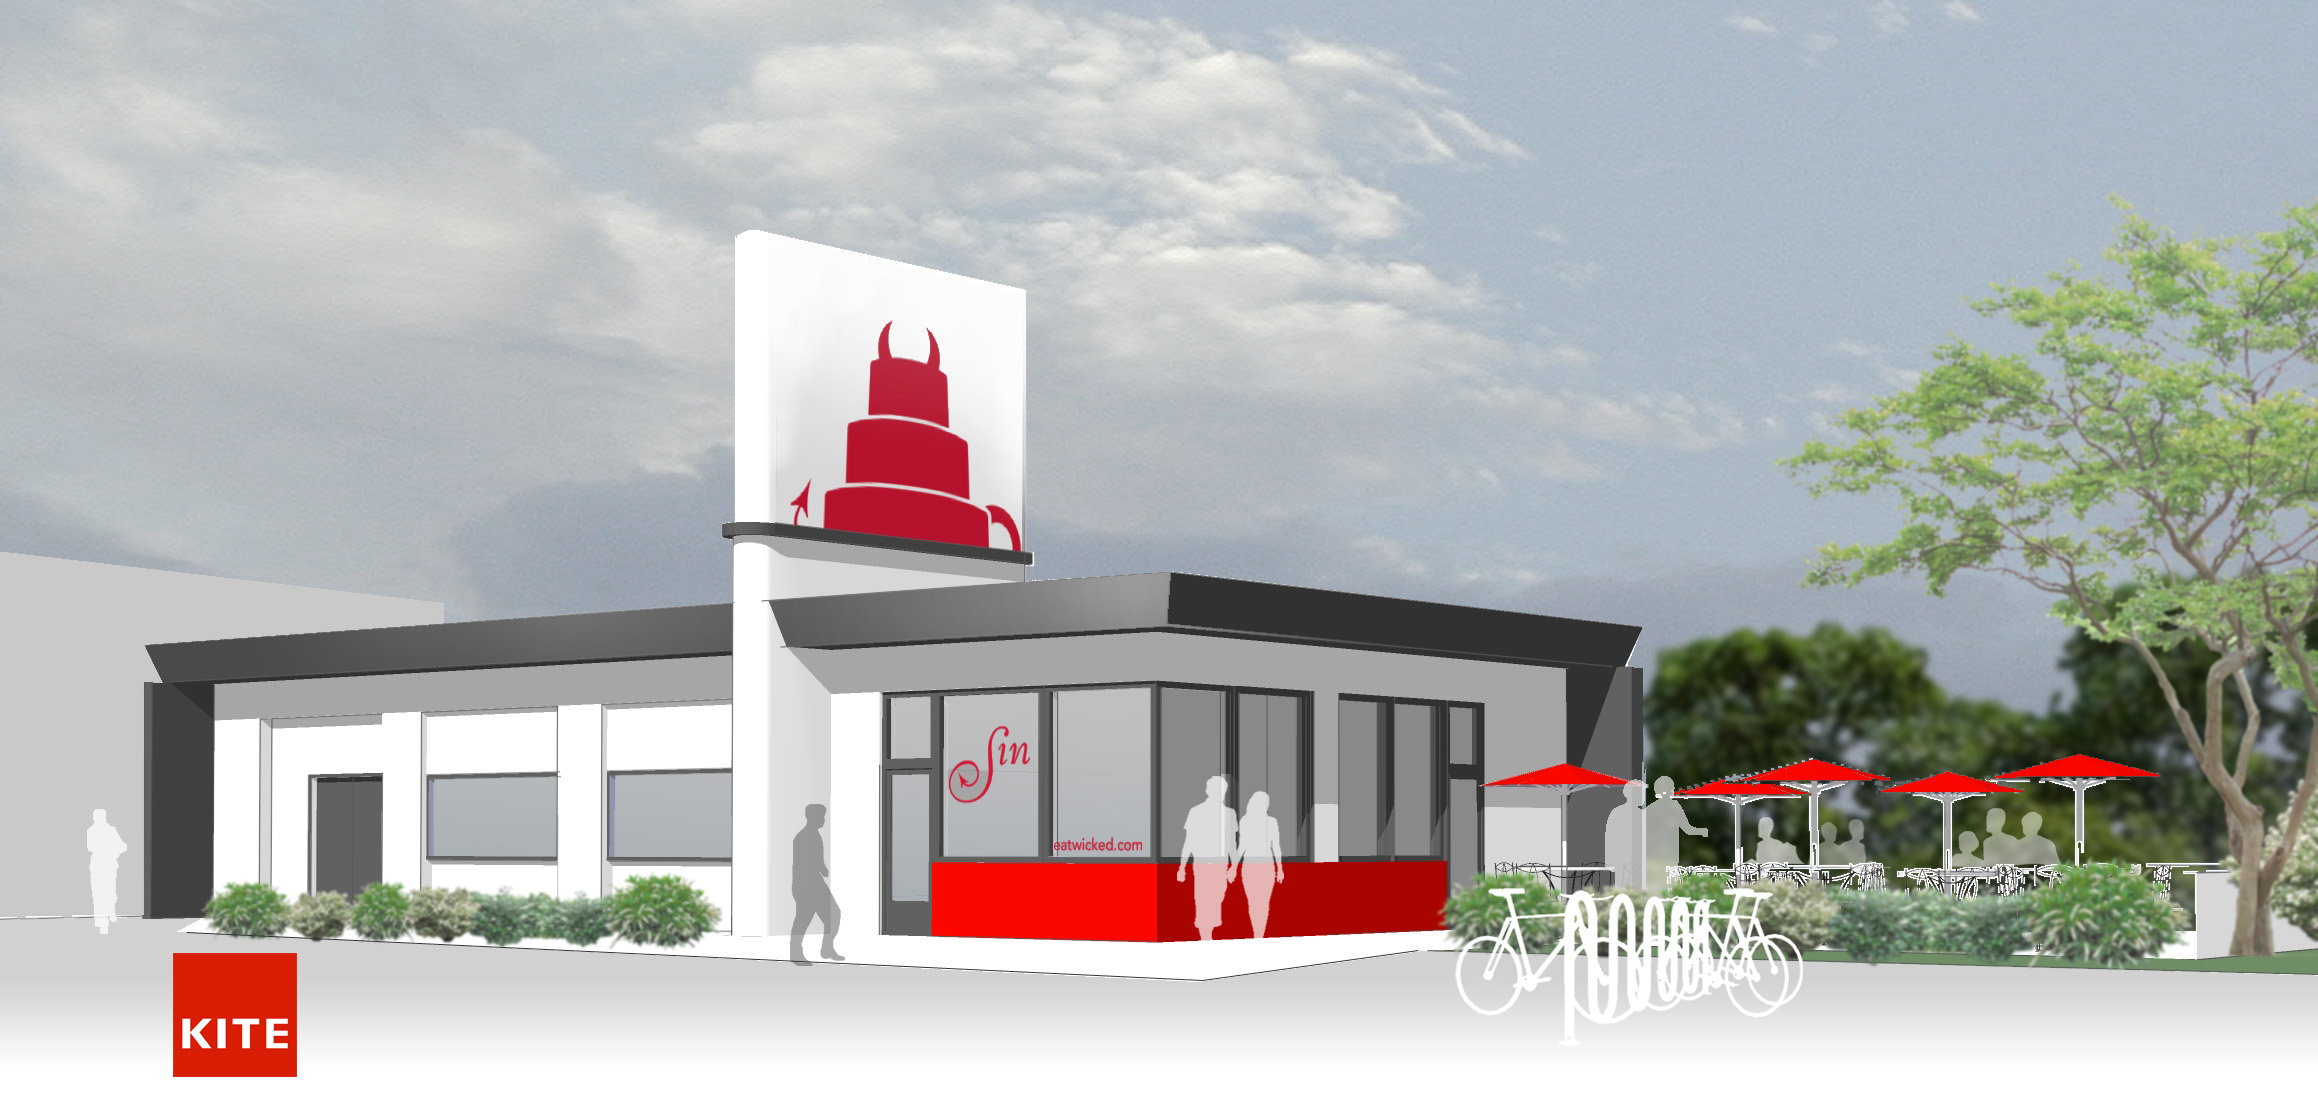  2013 rendering of former proposed location for Sin Bakery by design winner Christine West, KITE Architects 